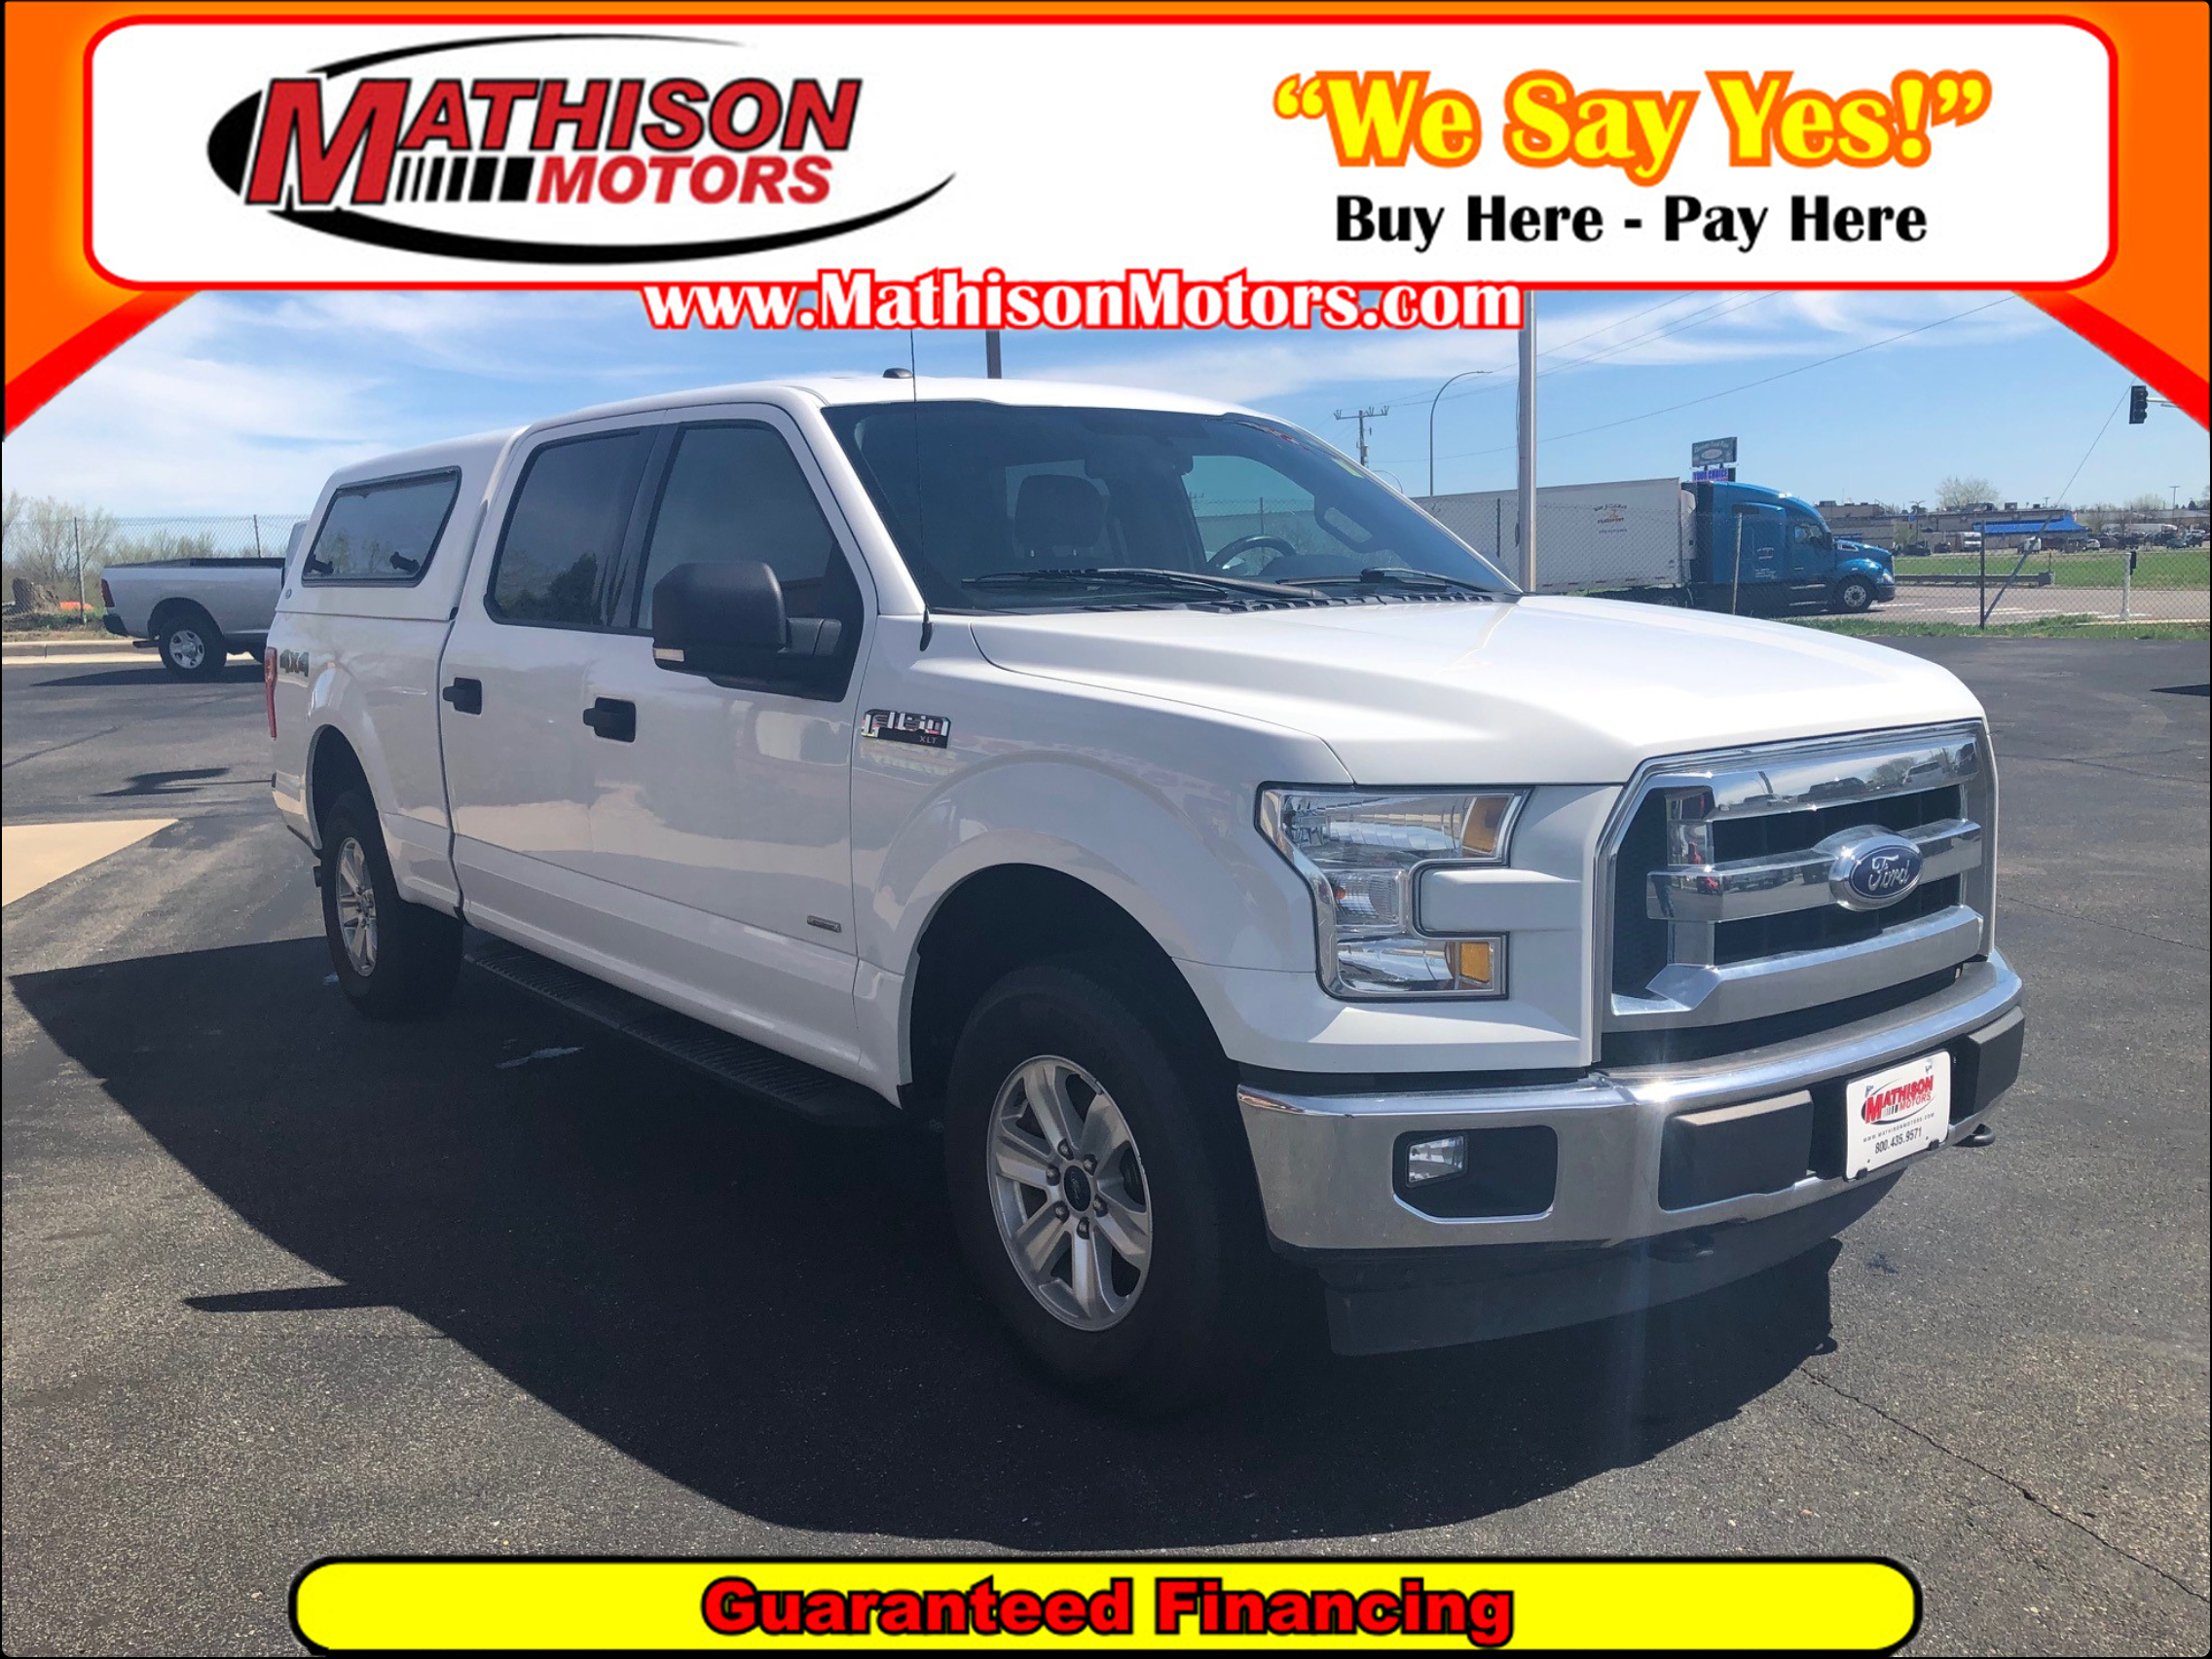 Used FORD F-150 2017 MATHISON XLT